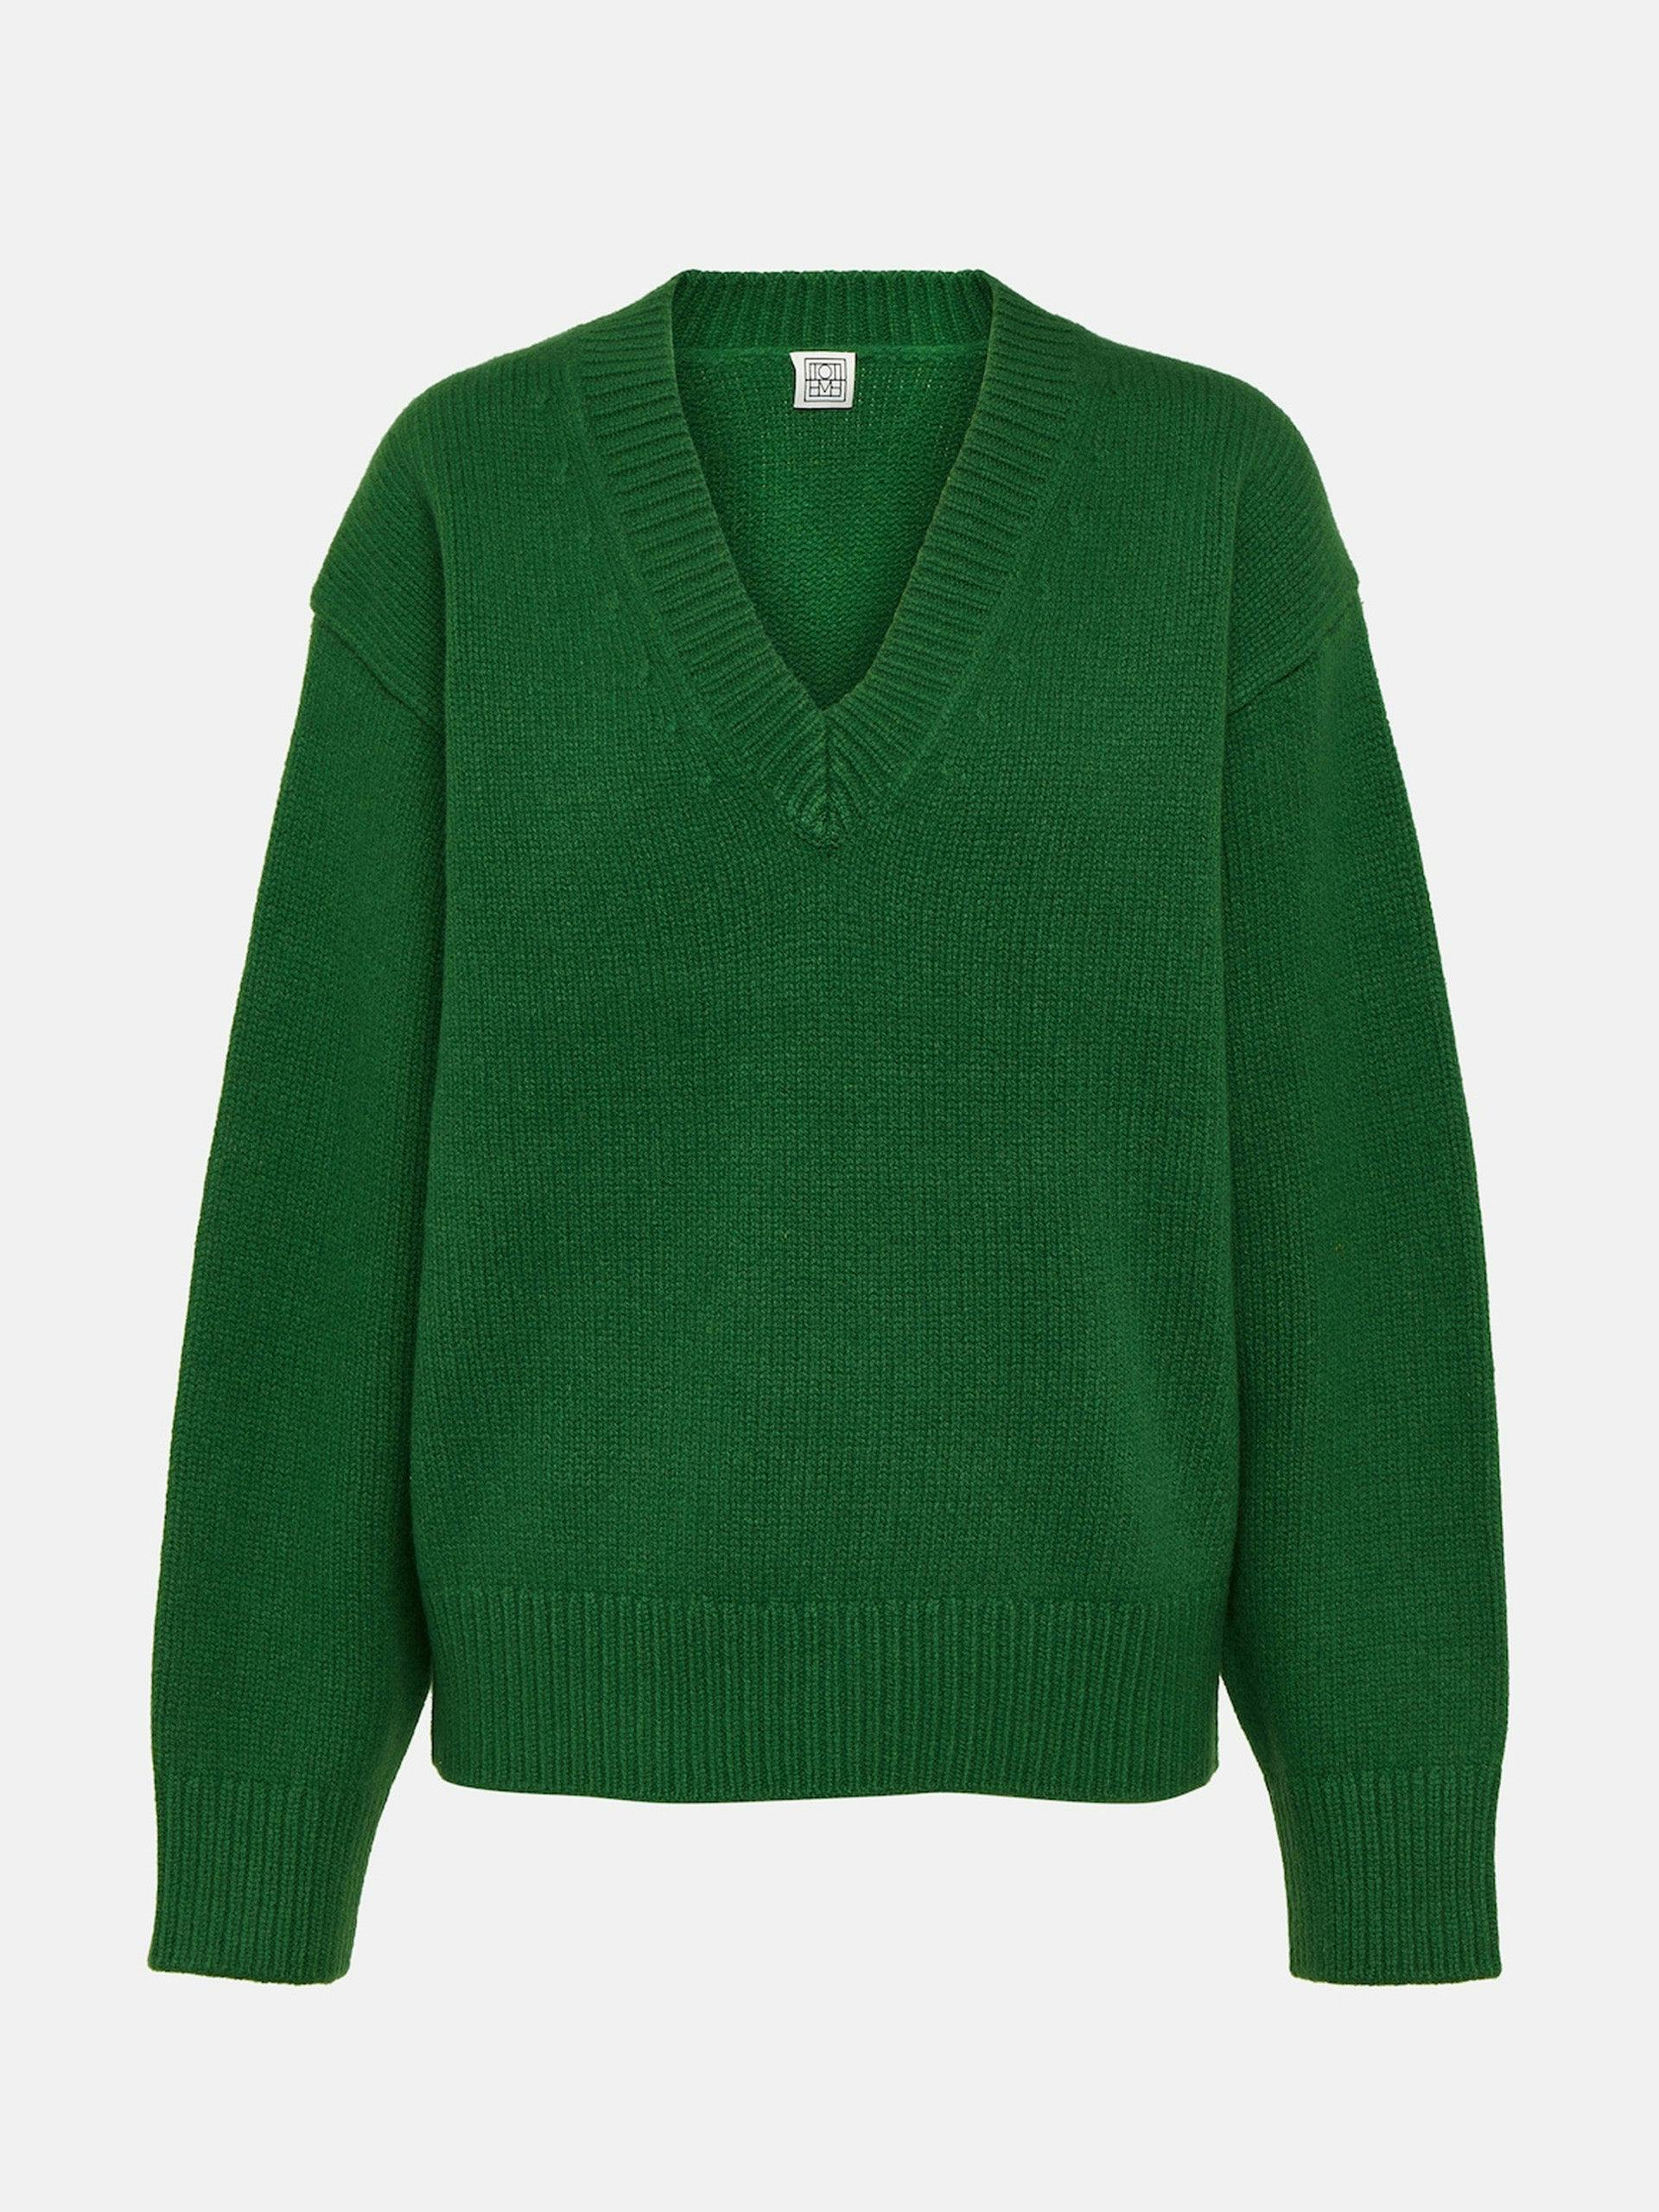 Wool and cashmere sweater